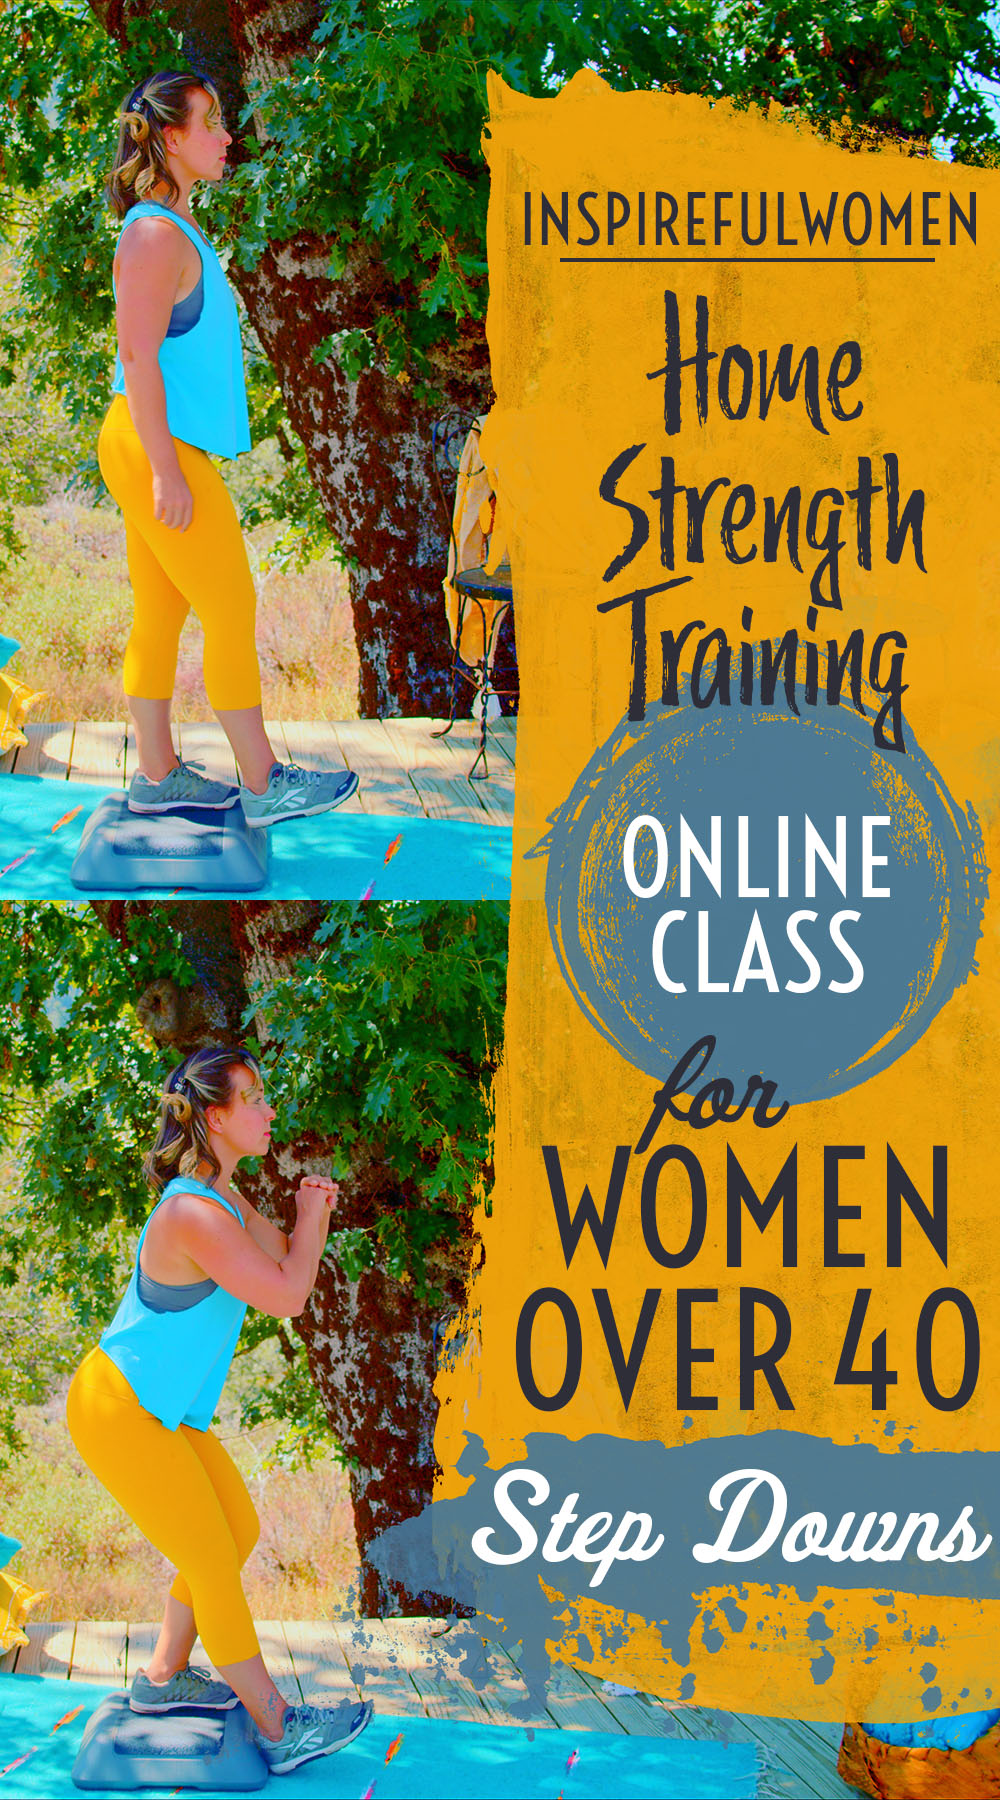 box-step-downs-squat-variation-quadriceps-glutes-lower-body-strength-exercise-at-home-women-40-plus